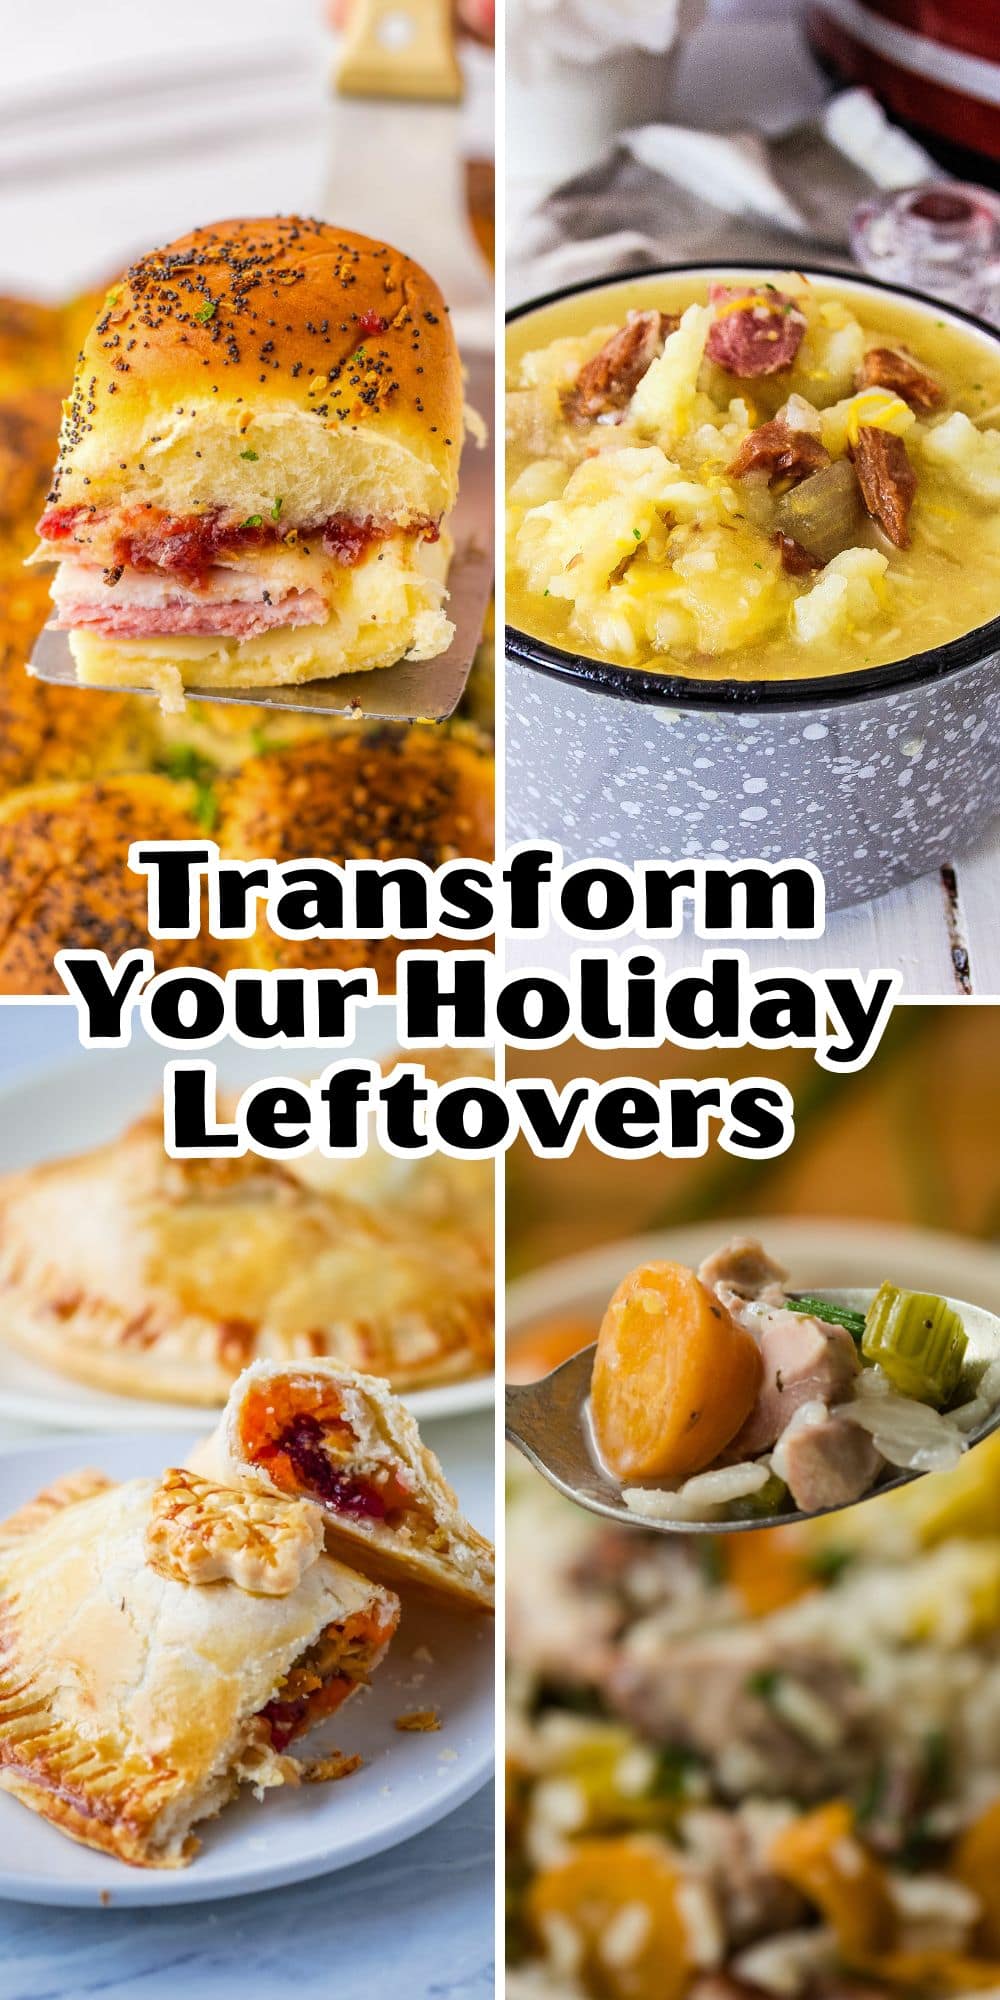 Transform your holiday leftovers.